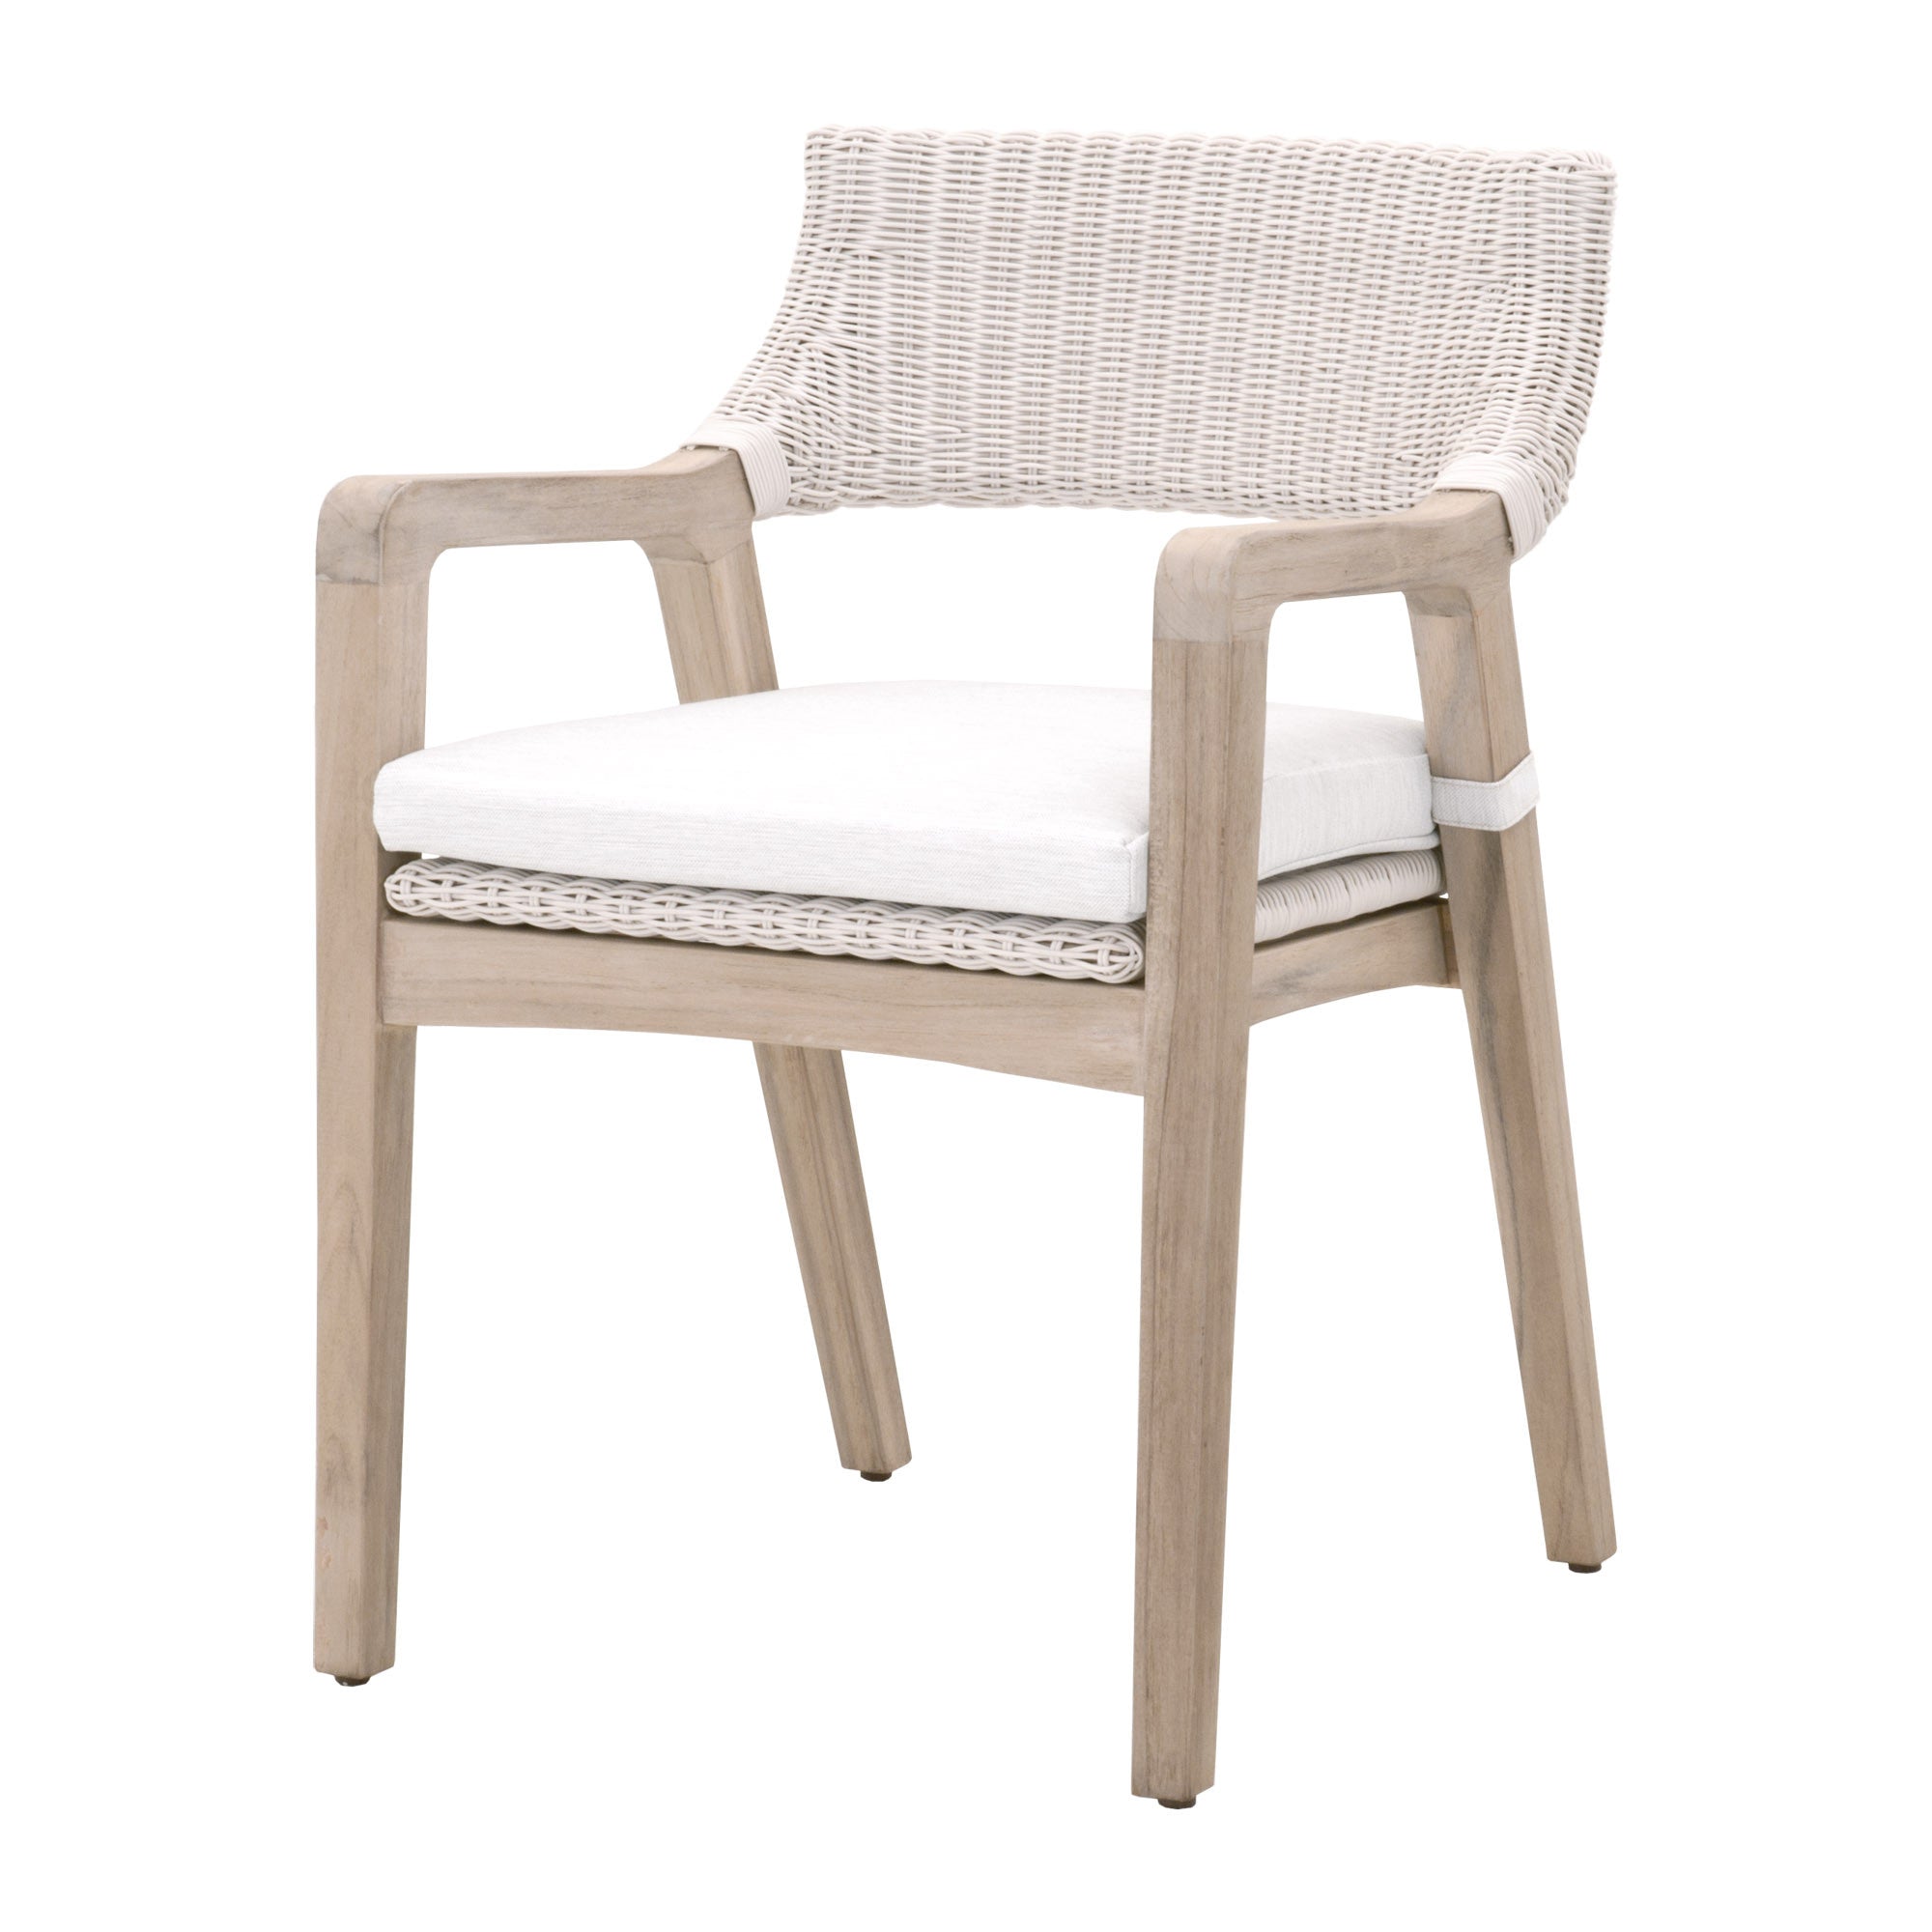 22" Light Gray And Natural Solid Wood Dining Chair With White Cushion - Tuesday Morning-Outdoor Chairs